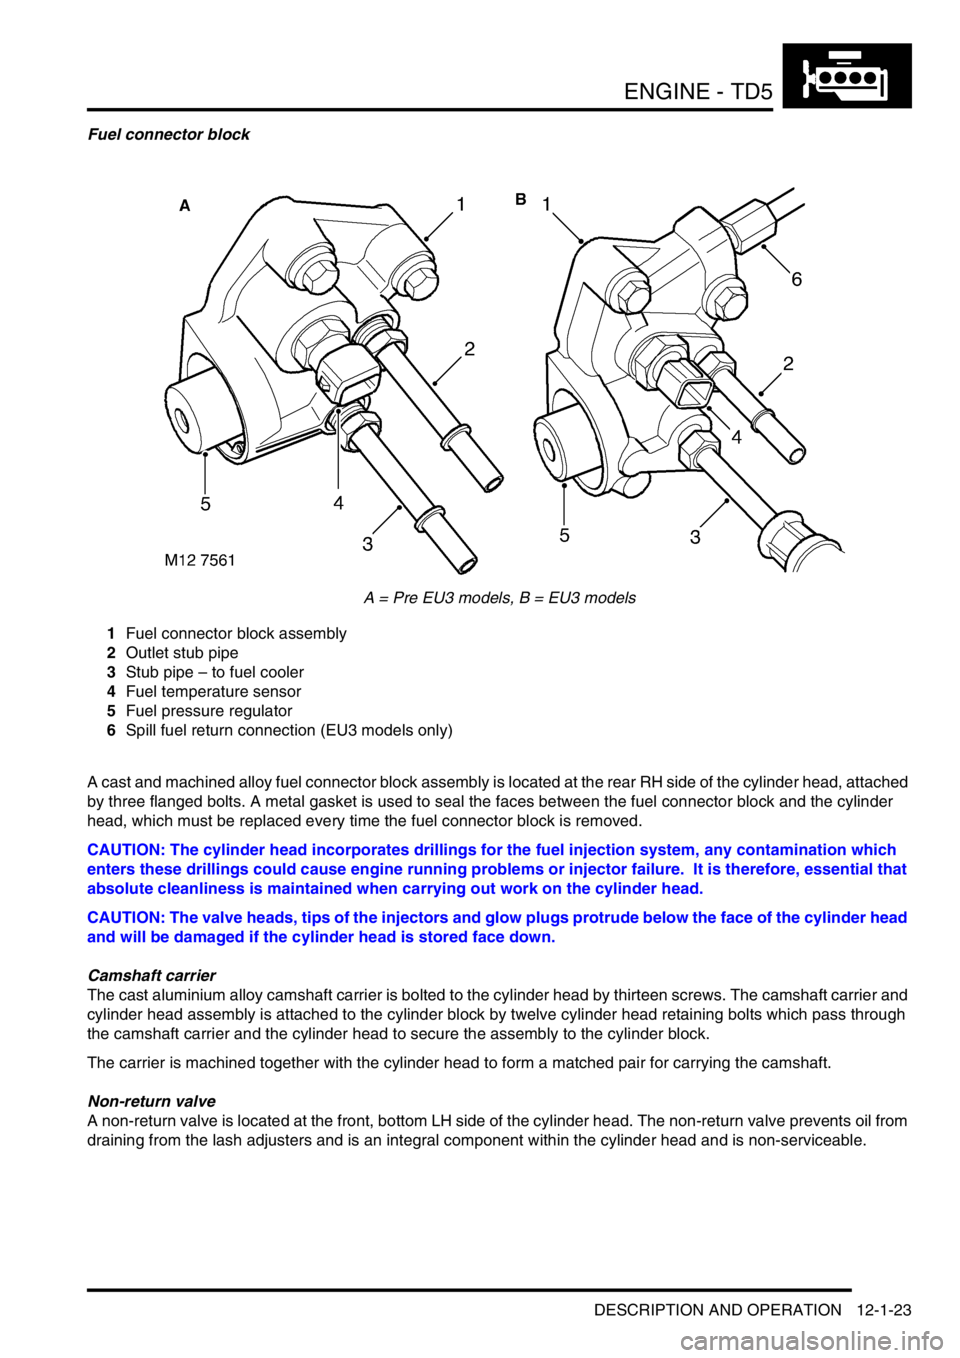 LAND ROVER DISCOVERY 2002  Workshop Manual ENGINE - TD5
DESCRIPTION AND OPERATION 12-1-23
Fuel connector block
A = Pre EU3 models, B = EU3 models
1Fuel connector block assembly
2Outlet stub pipe
3Stub pipe – to fuel cooler
4Fuel temperature 